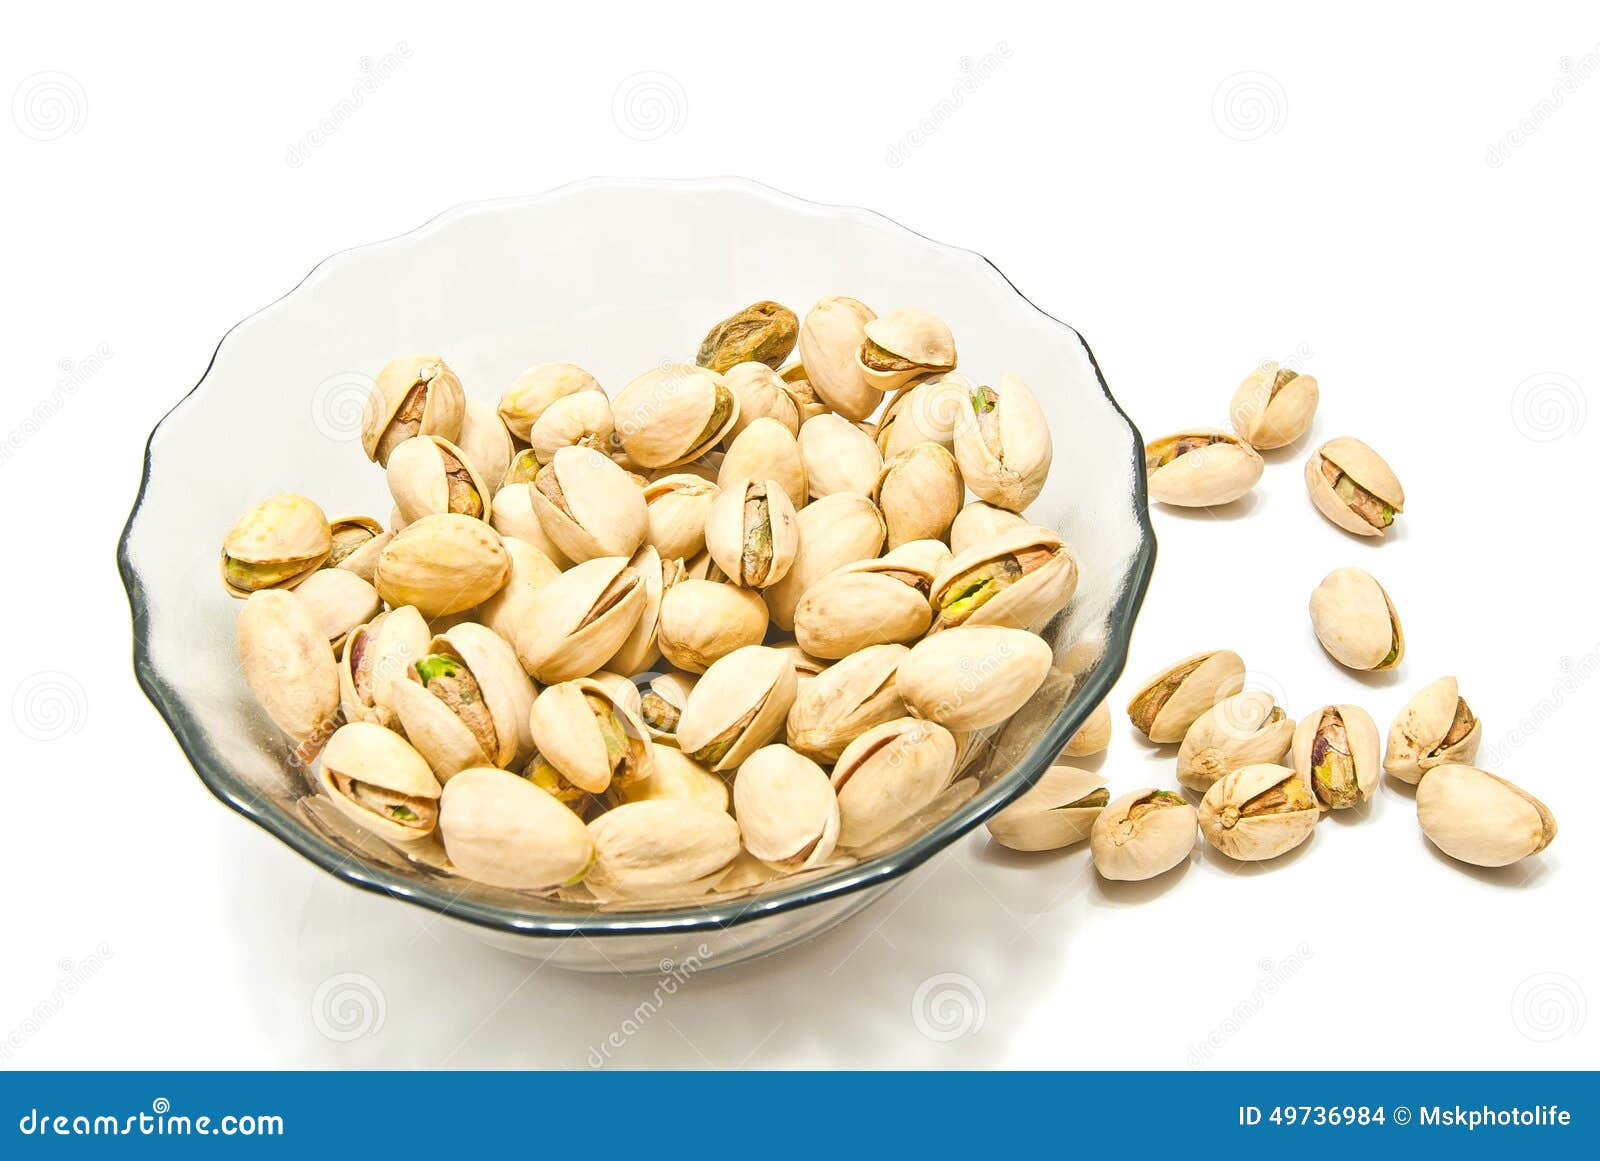 glass plate with tasty pistachios on white